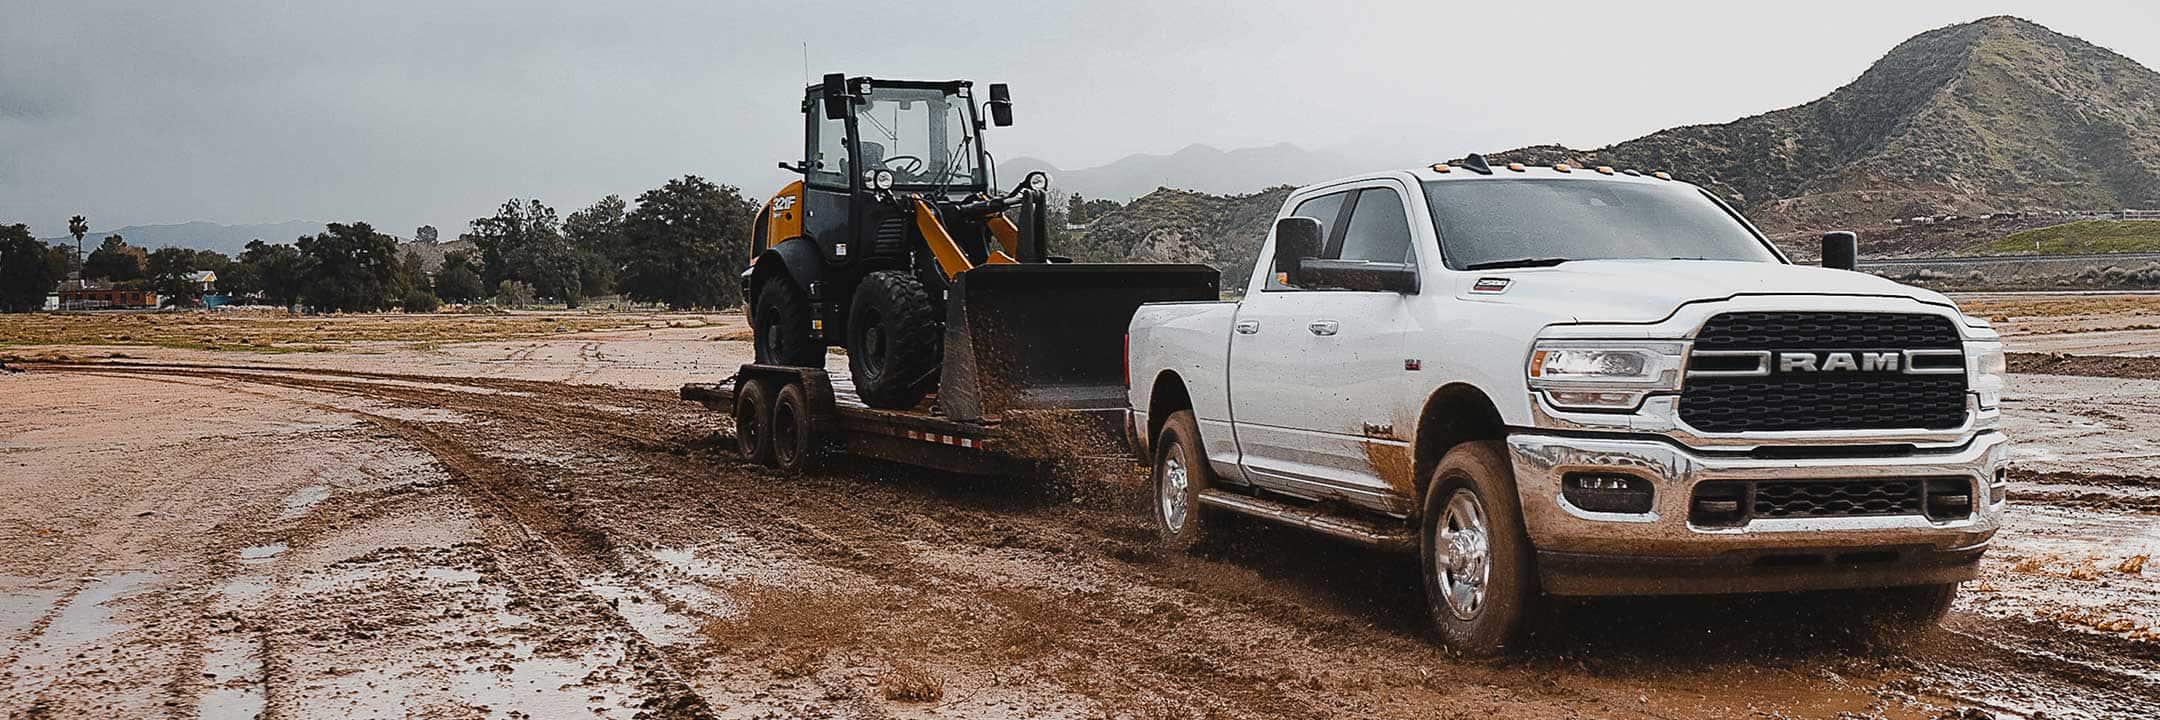 The 2022 Ram 2500 towing a flatbed with a digger on it through a muddy field.